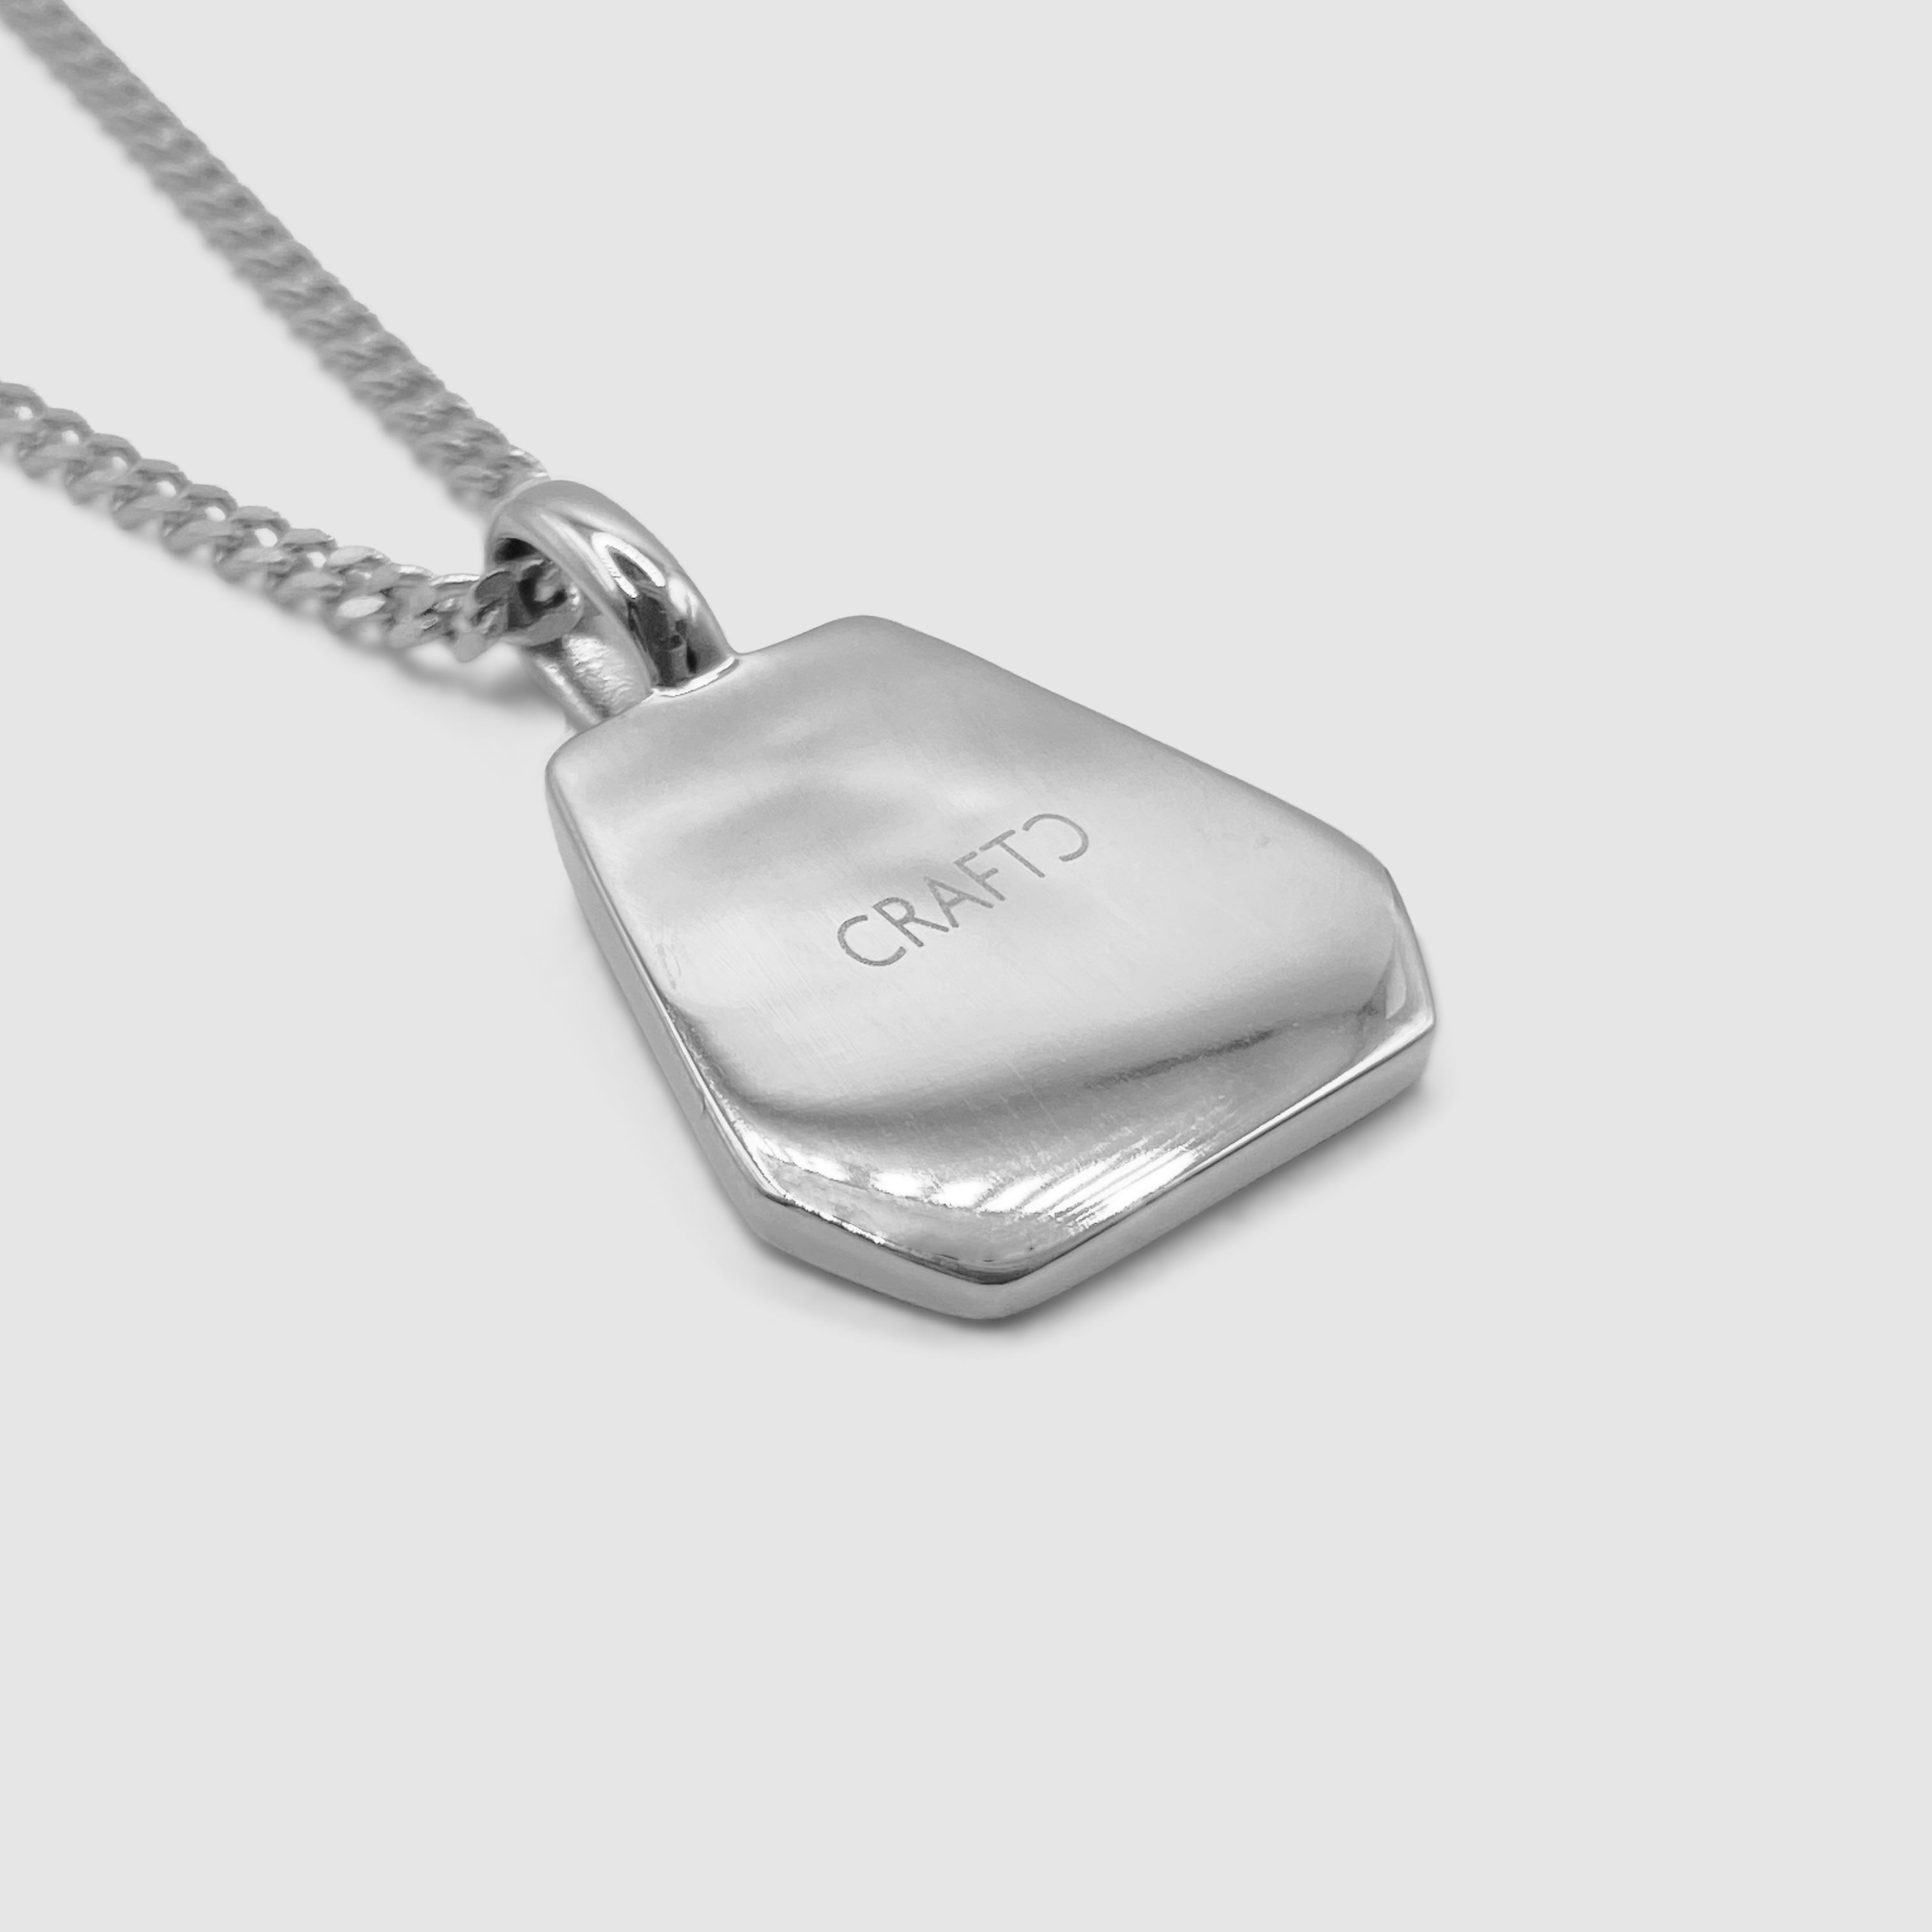 Imperfect (Silver)